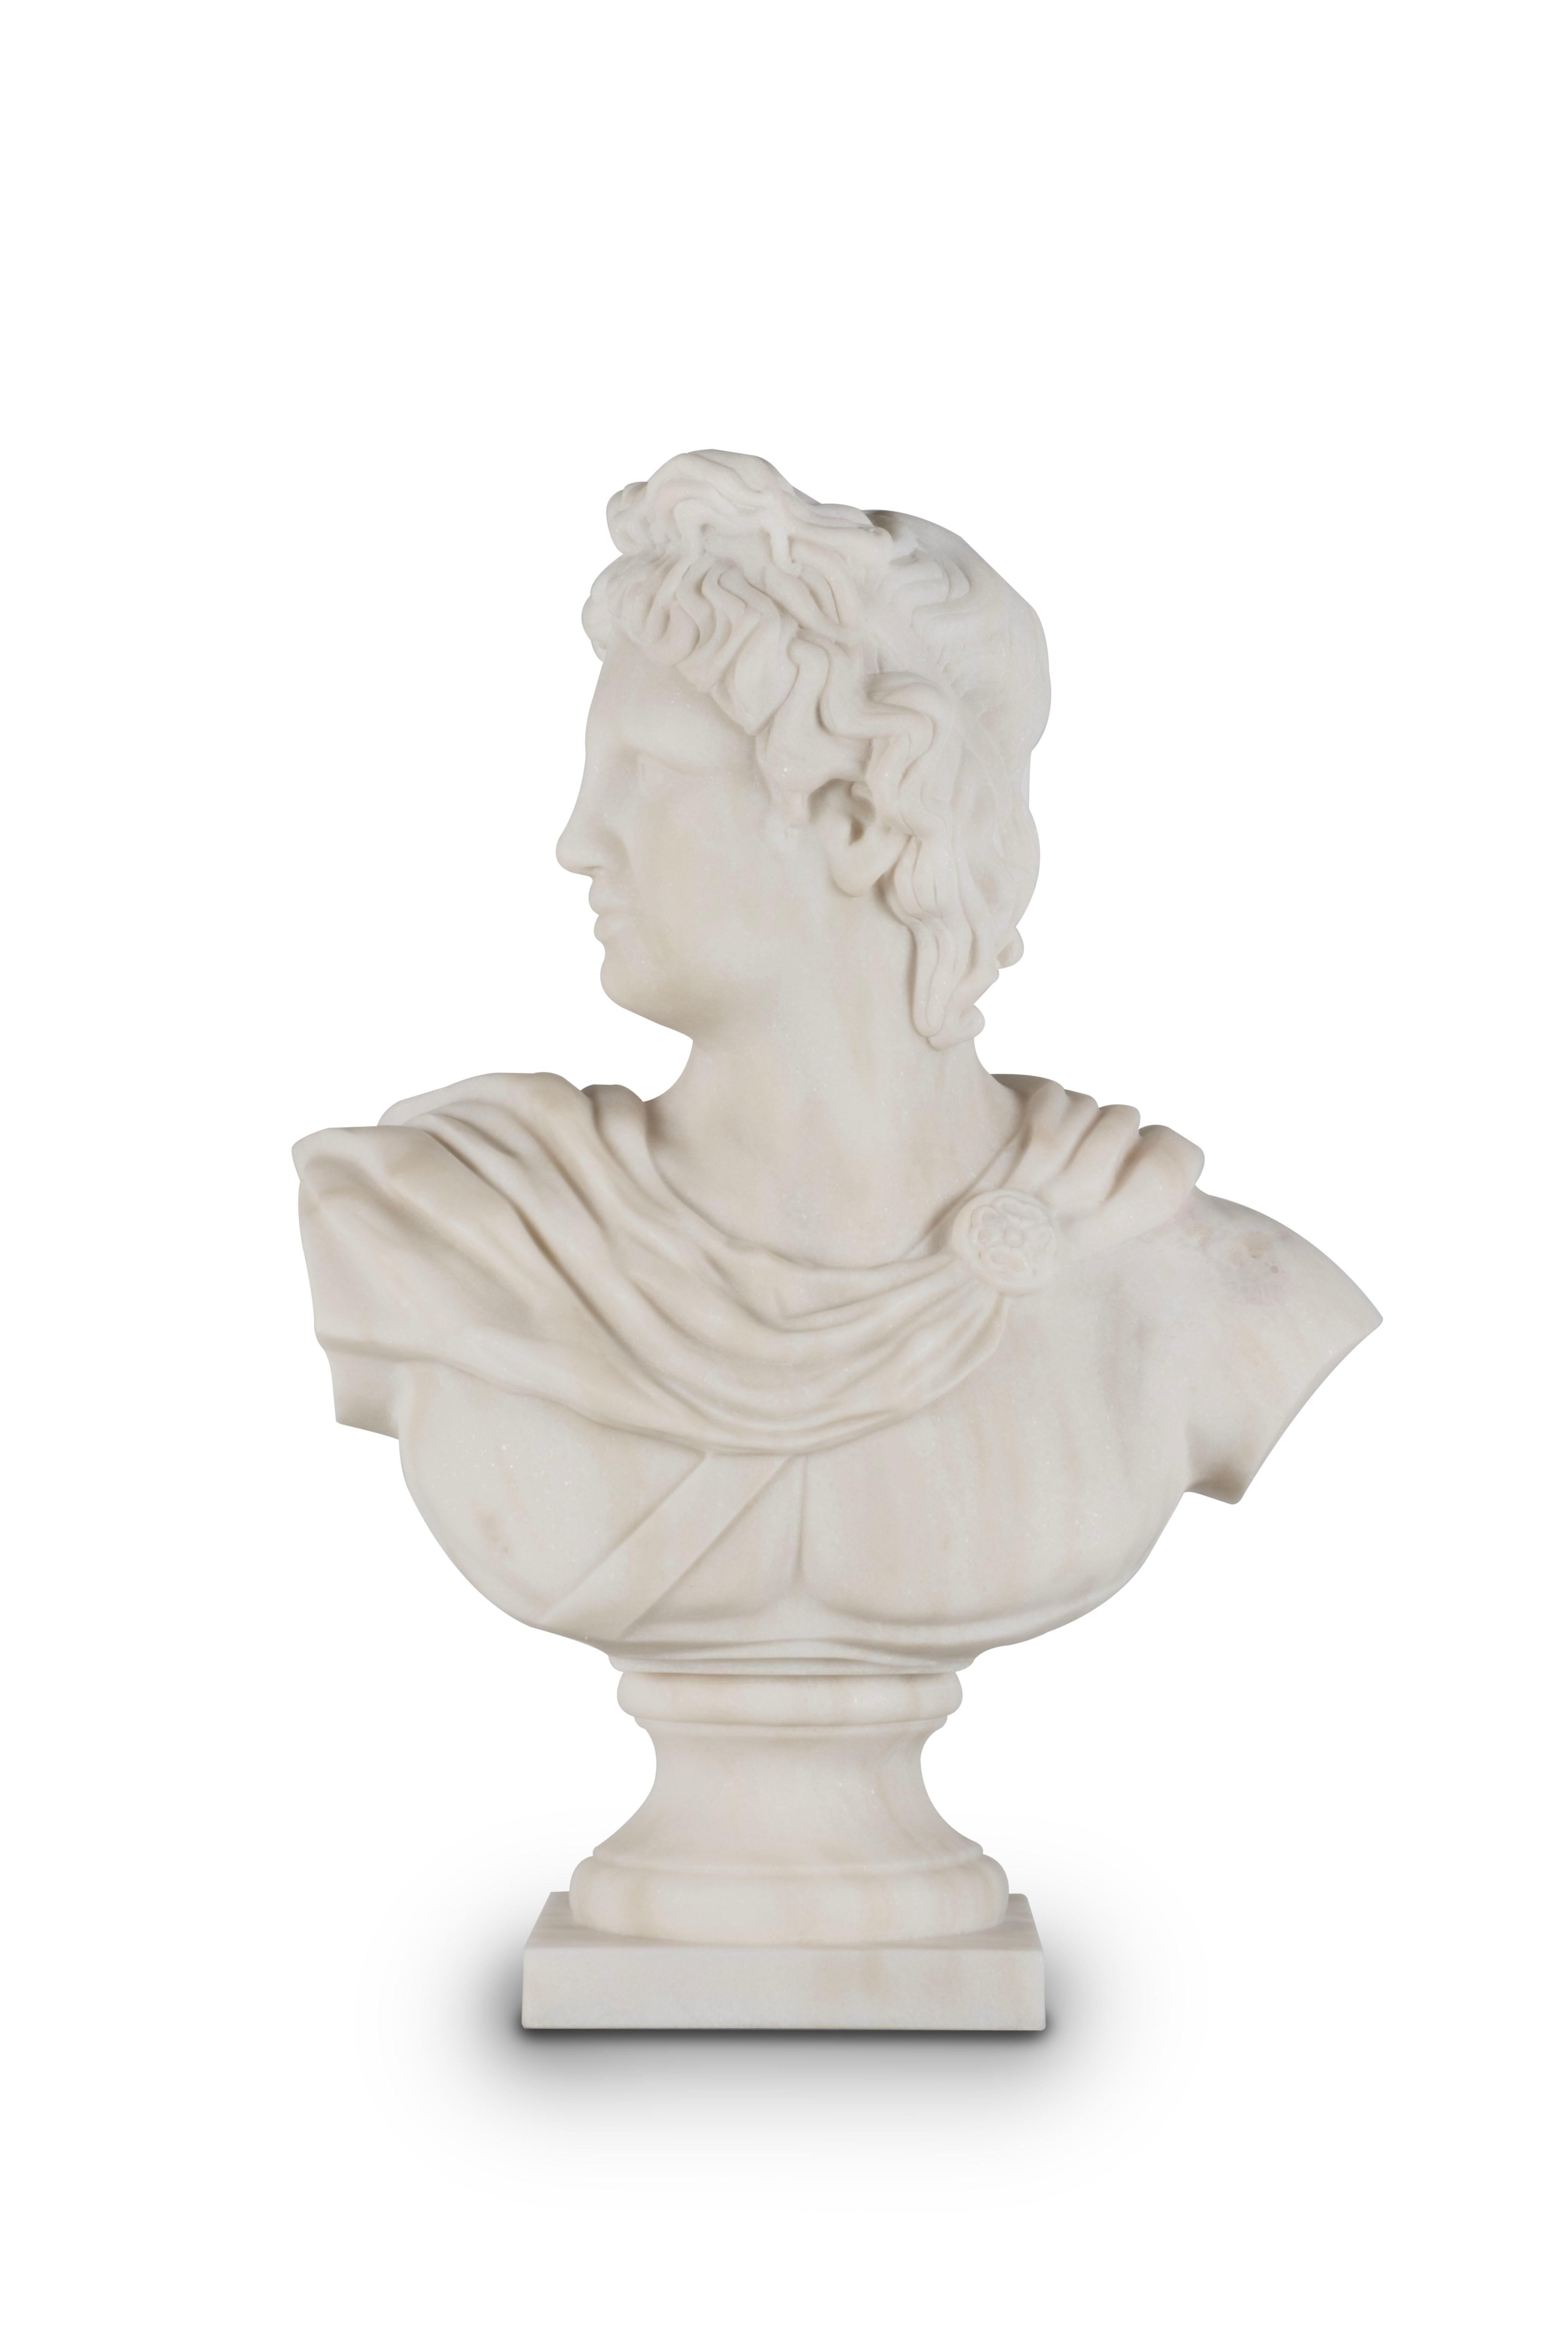 Hand-Carved Modern Apolo Bust Sculpture Piece Calacatta Marble, Handmade Portugal Greenapple For Sale